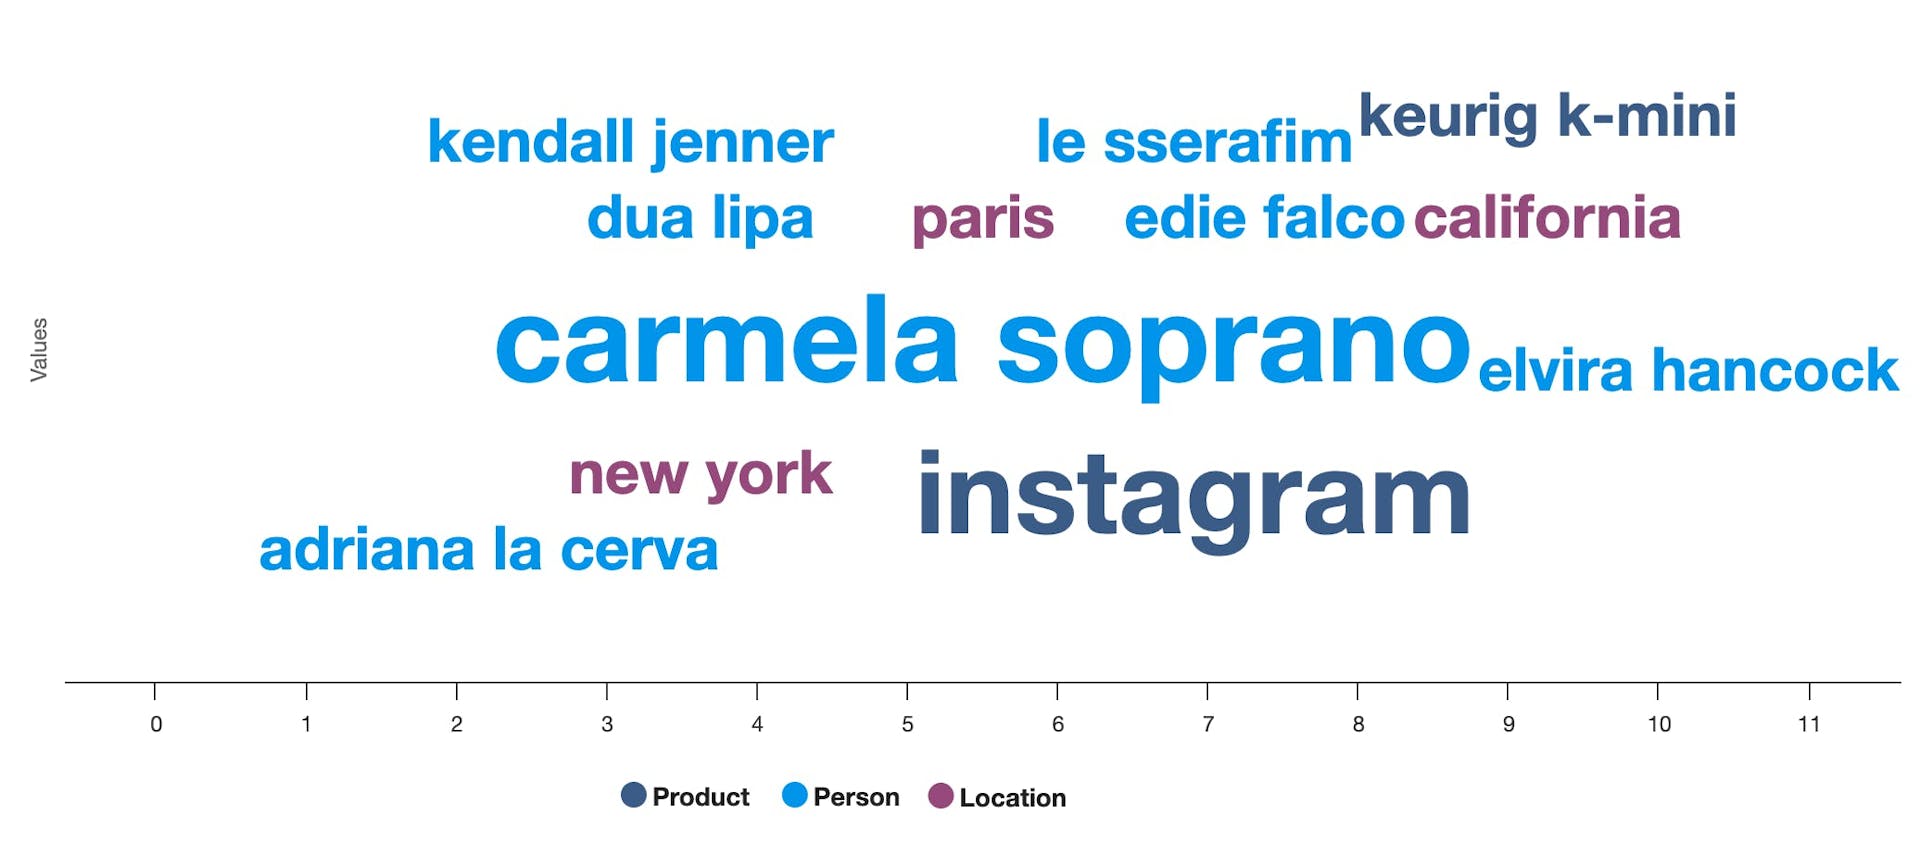 A cloud of top names and entities from the mob wife aesthetic conversation with "carmela soprano" at center in the largest font.